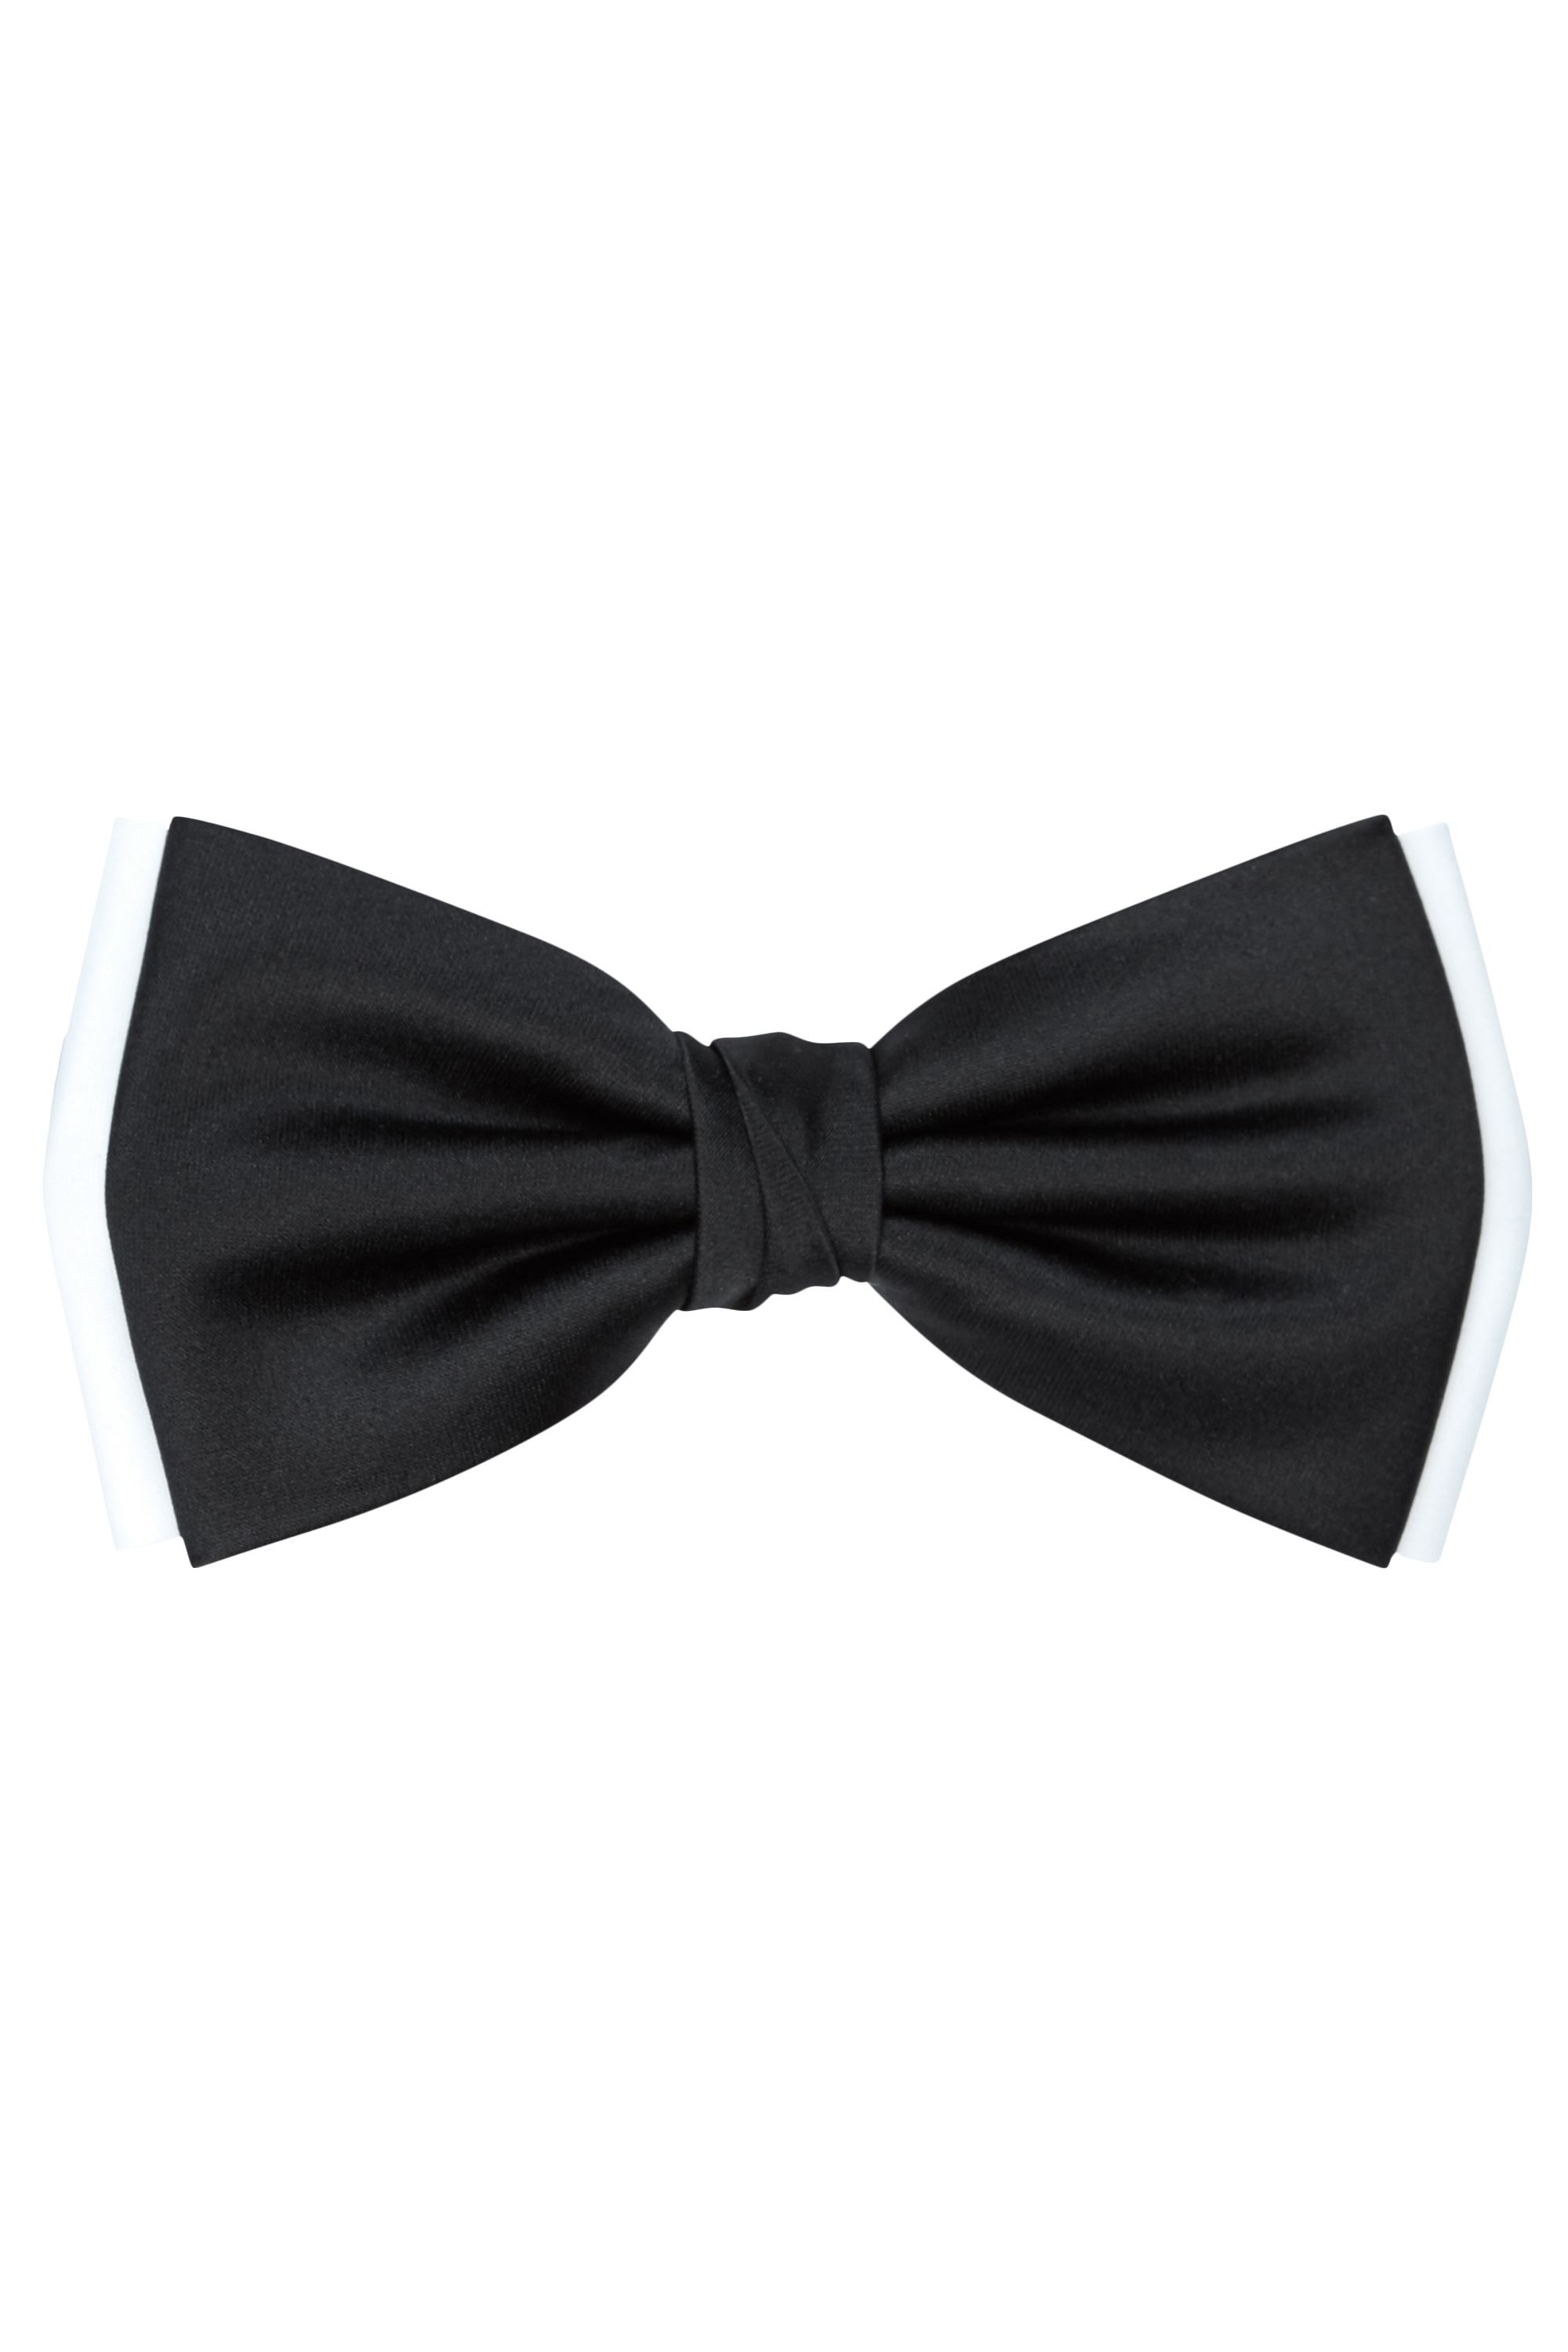 Moss 1851 Black and White Contrast Bow Tie | Buy Online at Moss